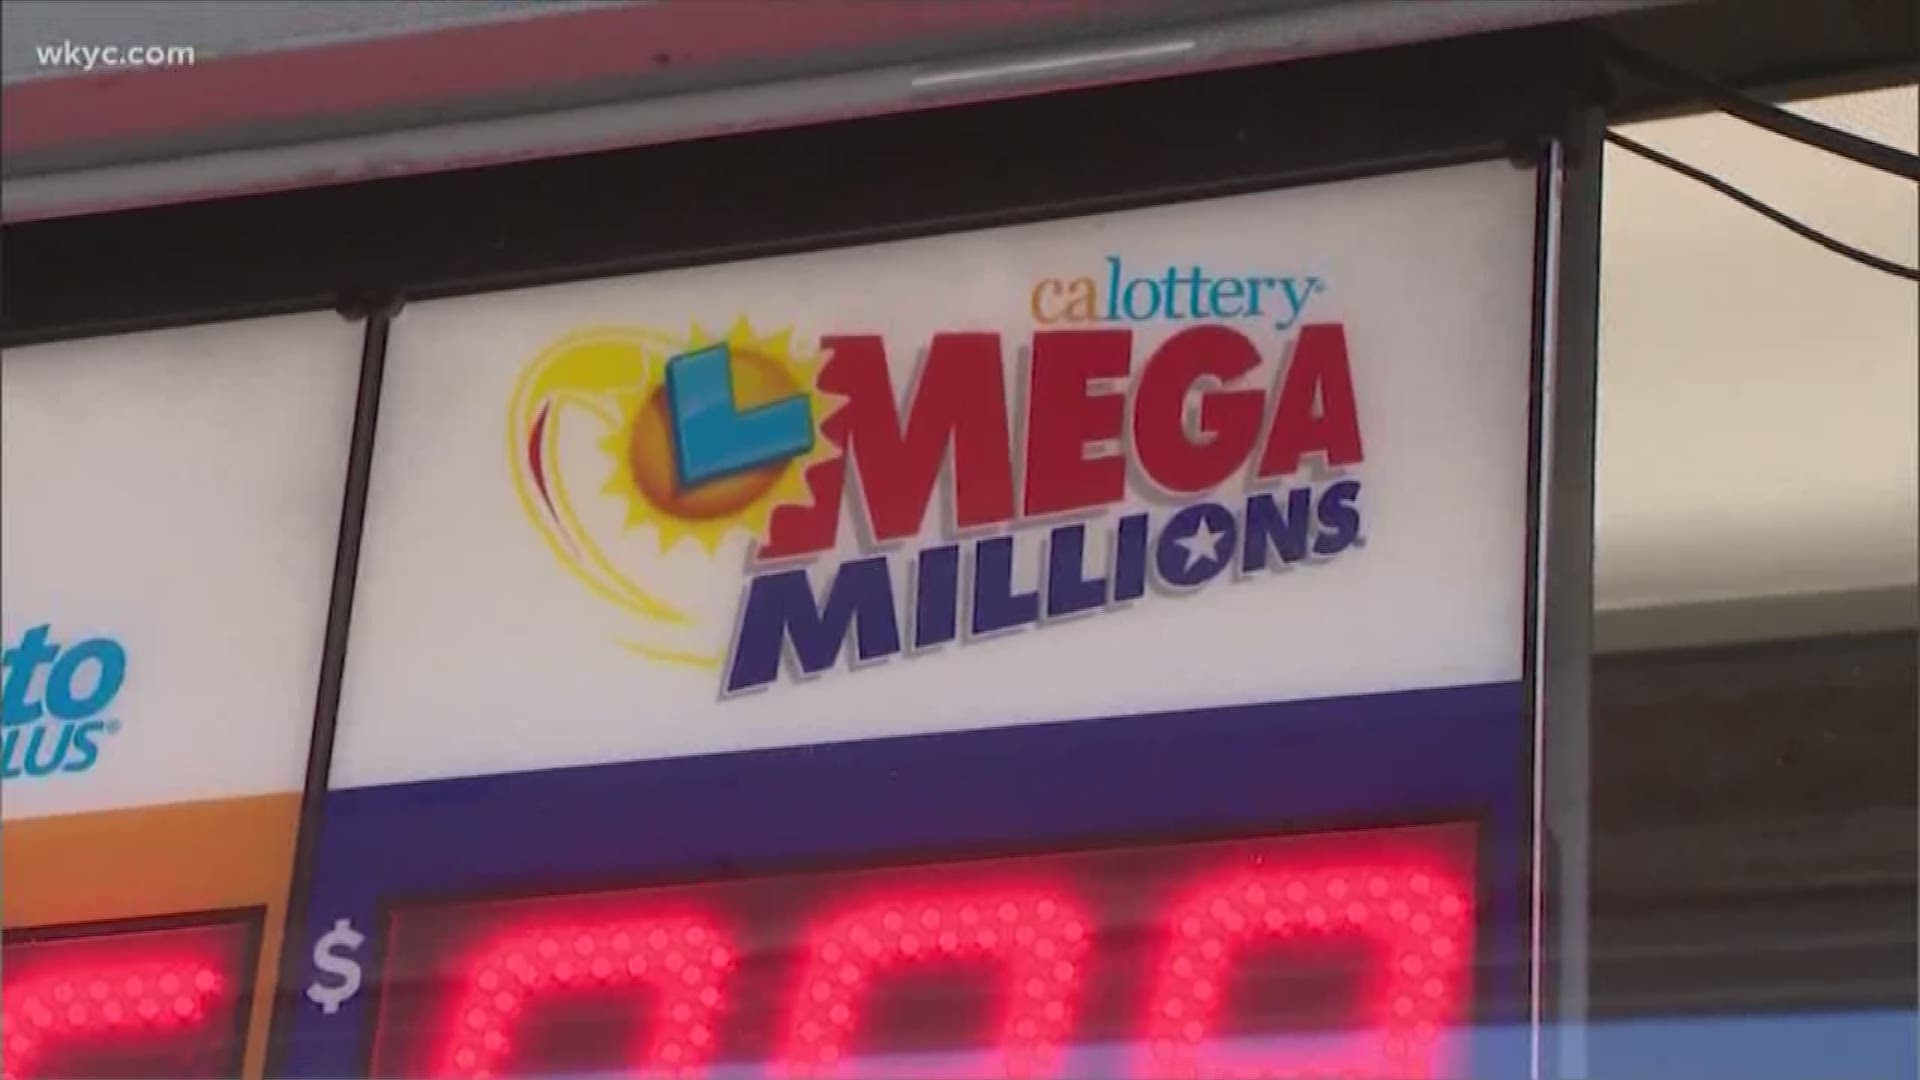 Jan. 2, 2019: One winning lottery ticket worth $1 million was sold in Tuesday's drawing of the Mega Millions to a player in Mount Orab, Ohio.